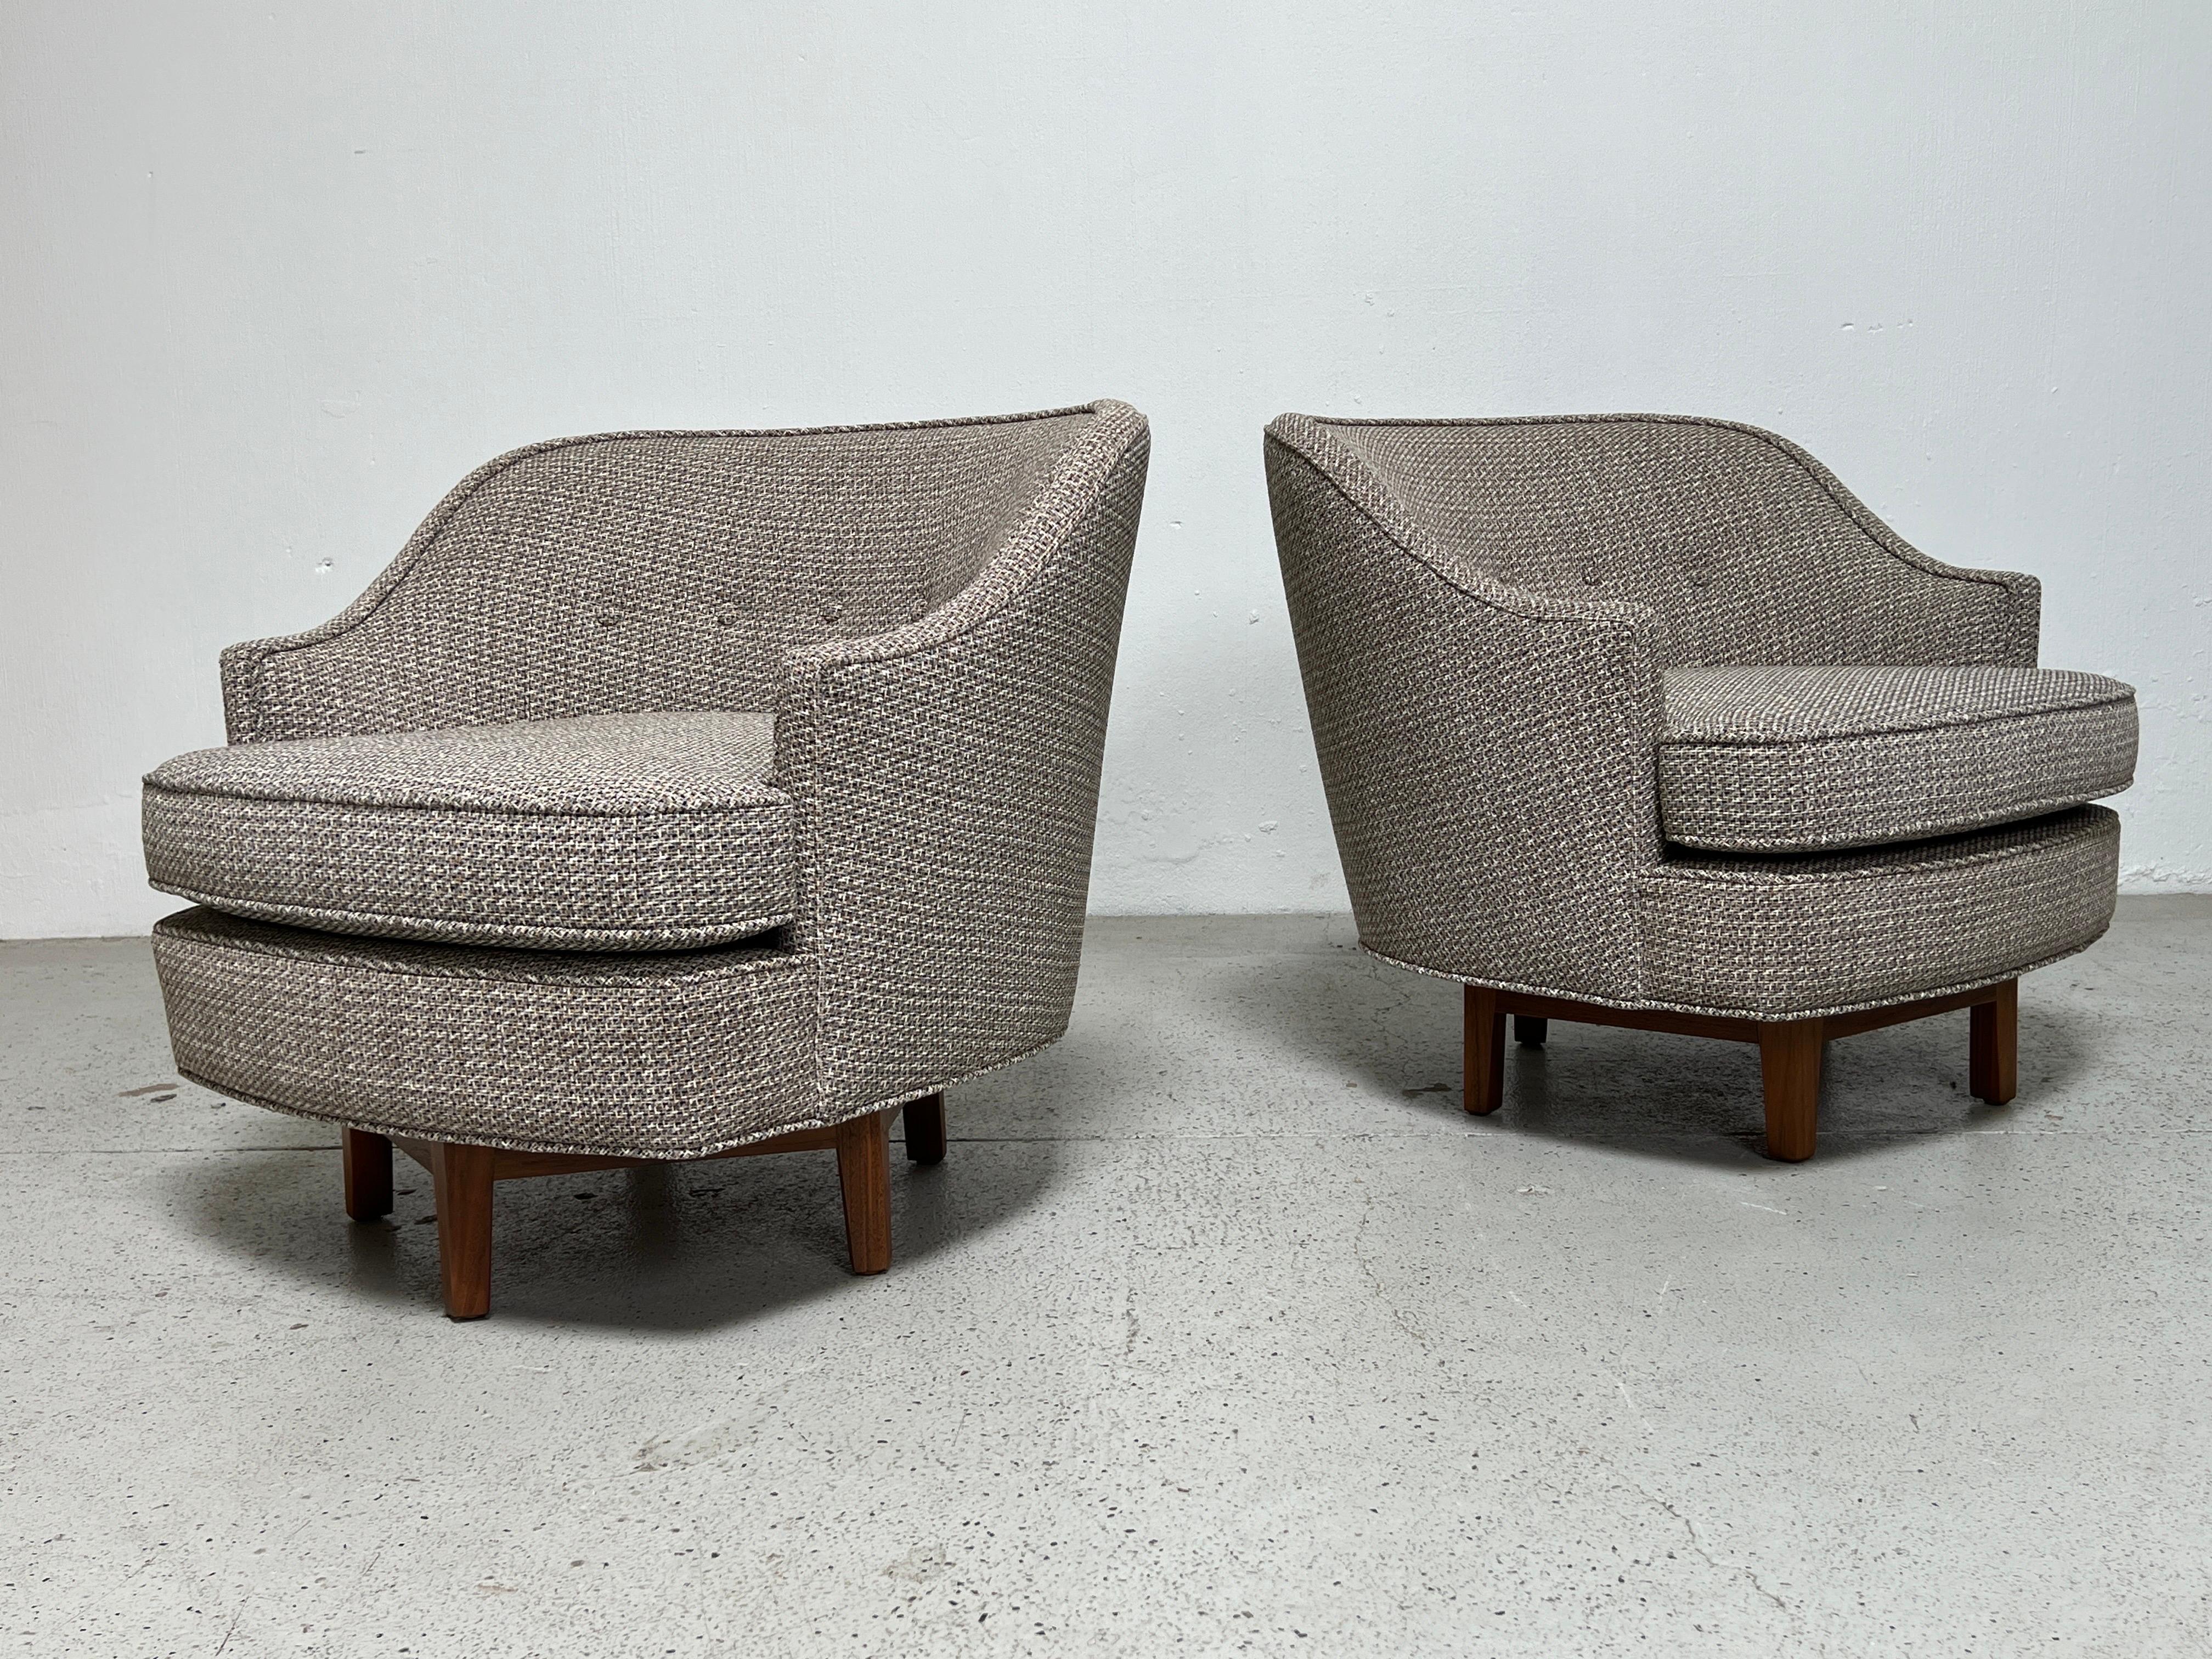 A pair of Janus swivel chairs with walnut bases. Designed by Edward Wormley for Dunbar. Fully restored, refinished and reupholstered.
*Four matching chairs available. 